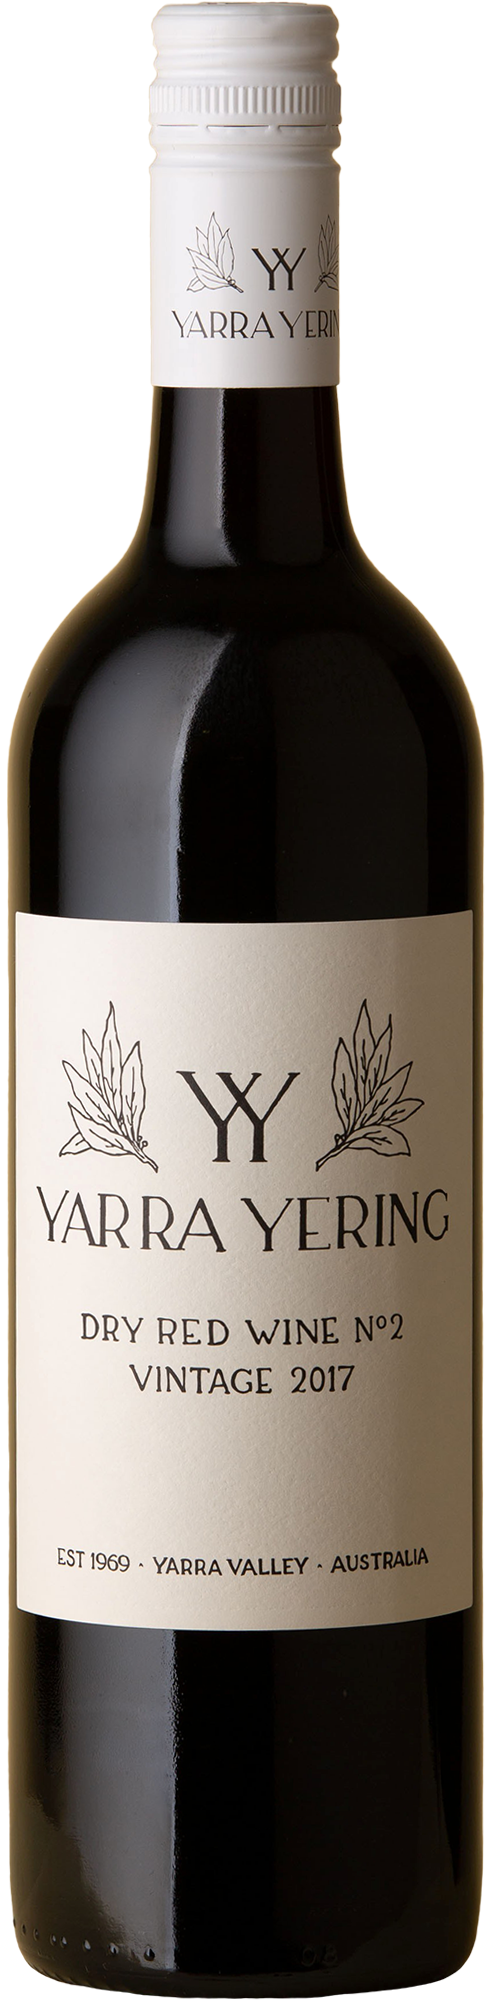 Yarra Yering - Dry Red No. 2 Red Blend 2017 Red Wine